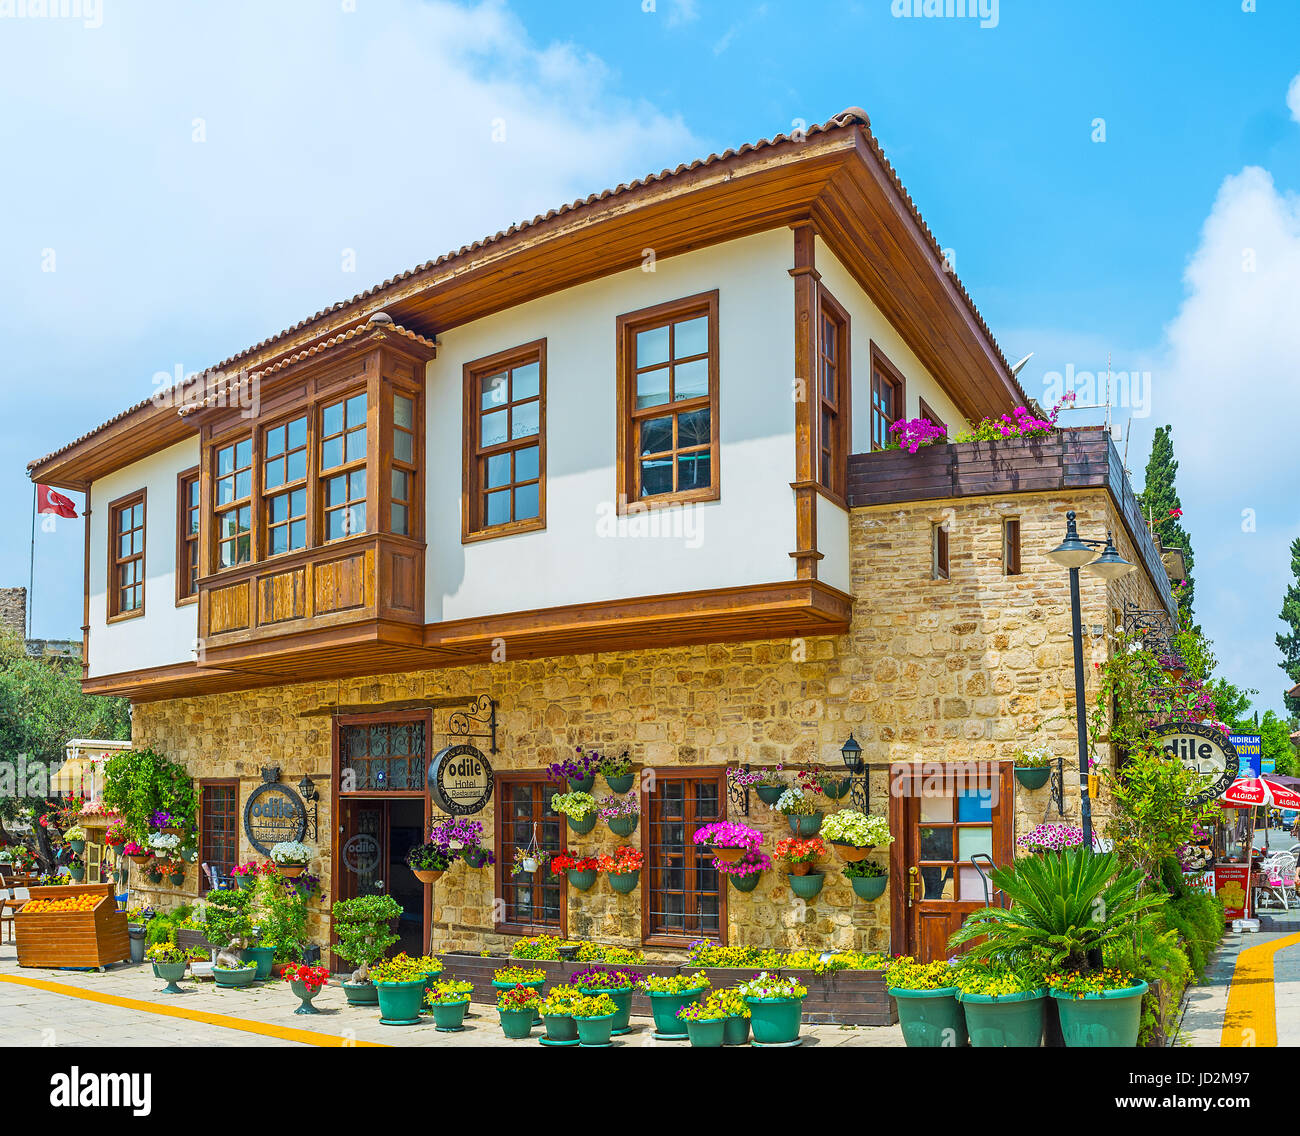 ANTALYA, TURKEY - MAY 6, 2017: The traditional hotel in Ottoman townhouse decorated with colorful pansies and petunias in pots, on May 6 in Antalya. Stock Photo